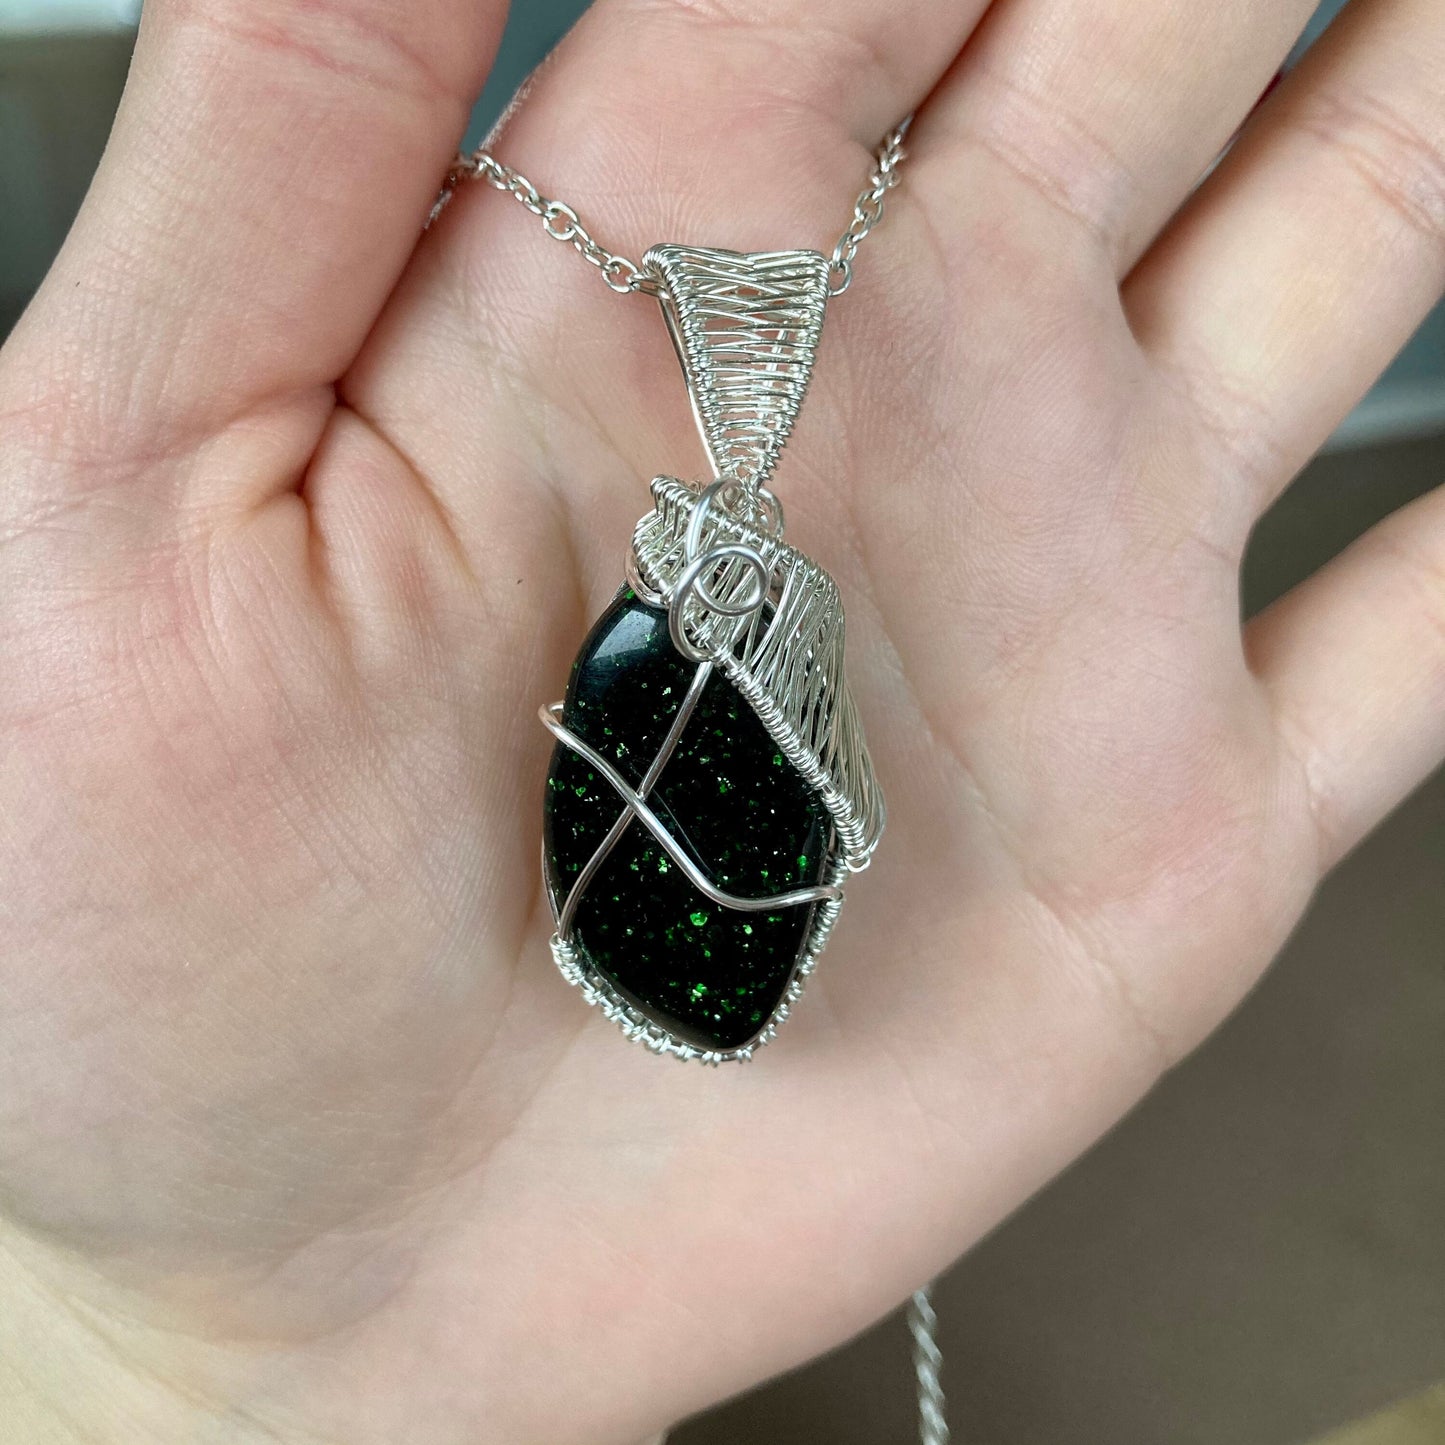 Green goldstone pendant handmade necklace wire wrapped natural stone with 18 inch length chain